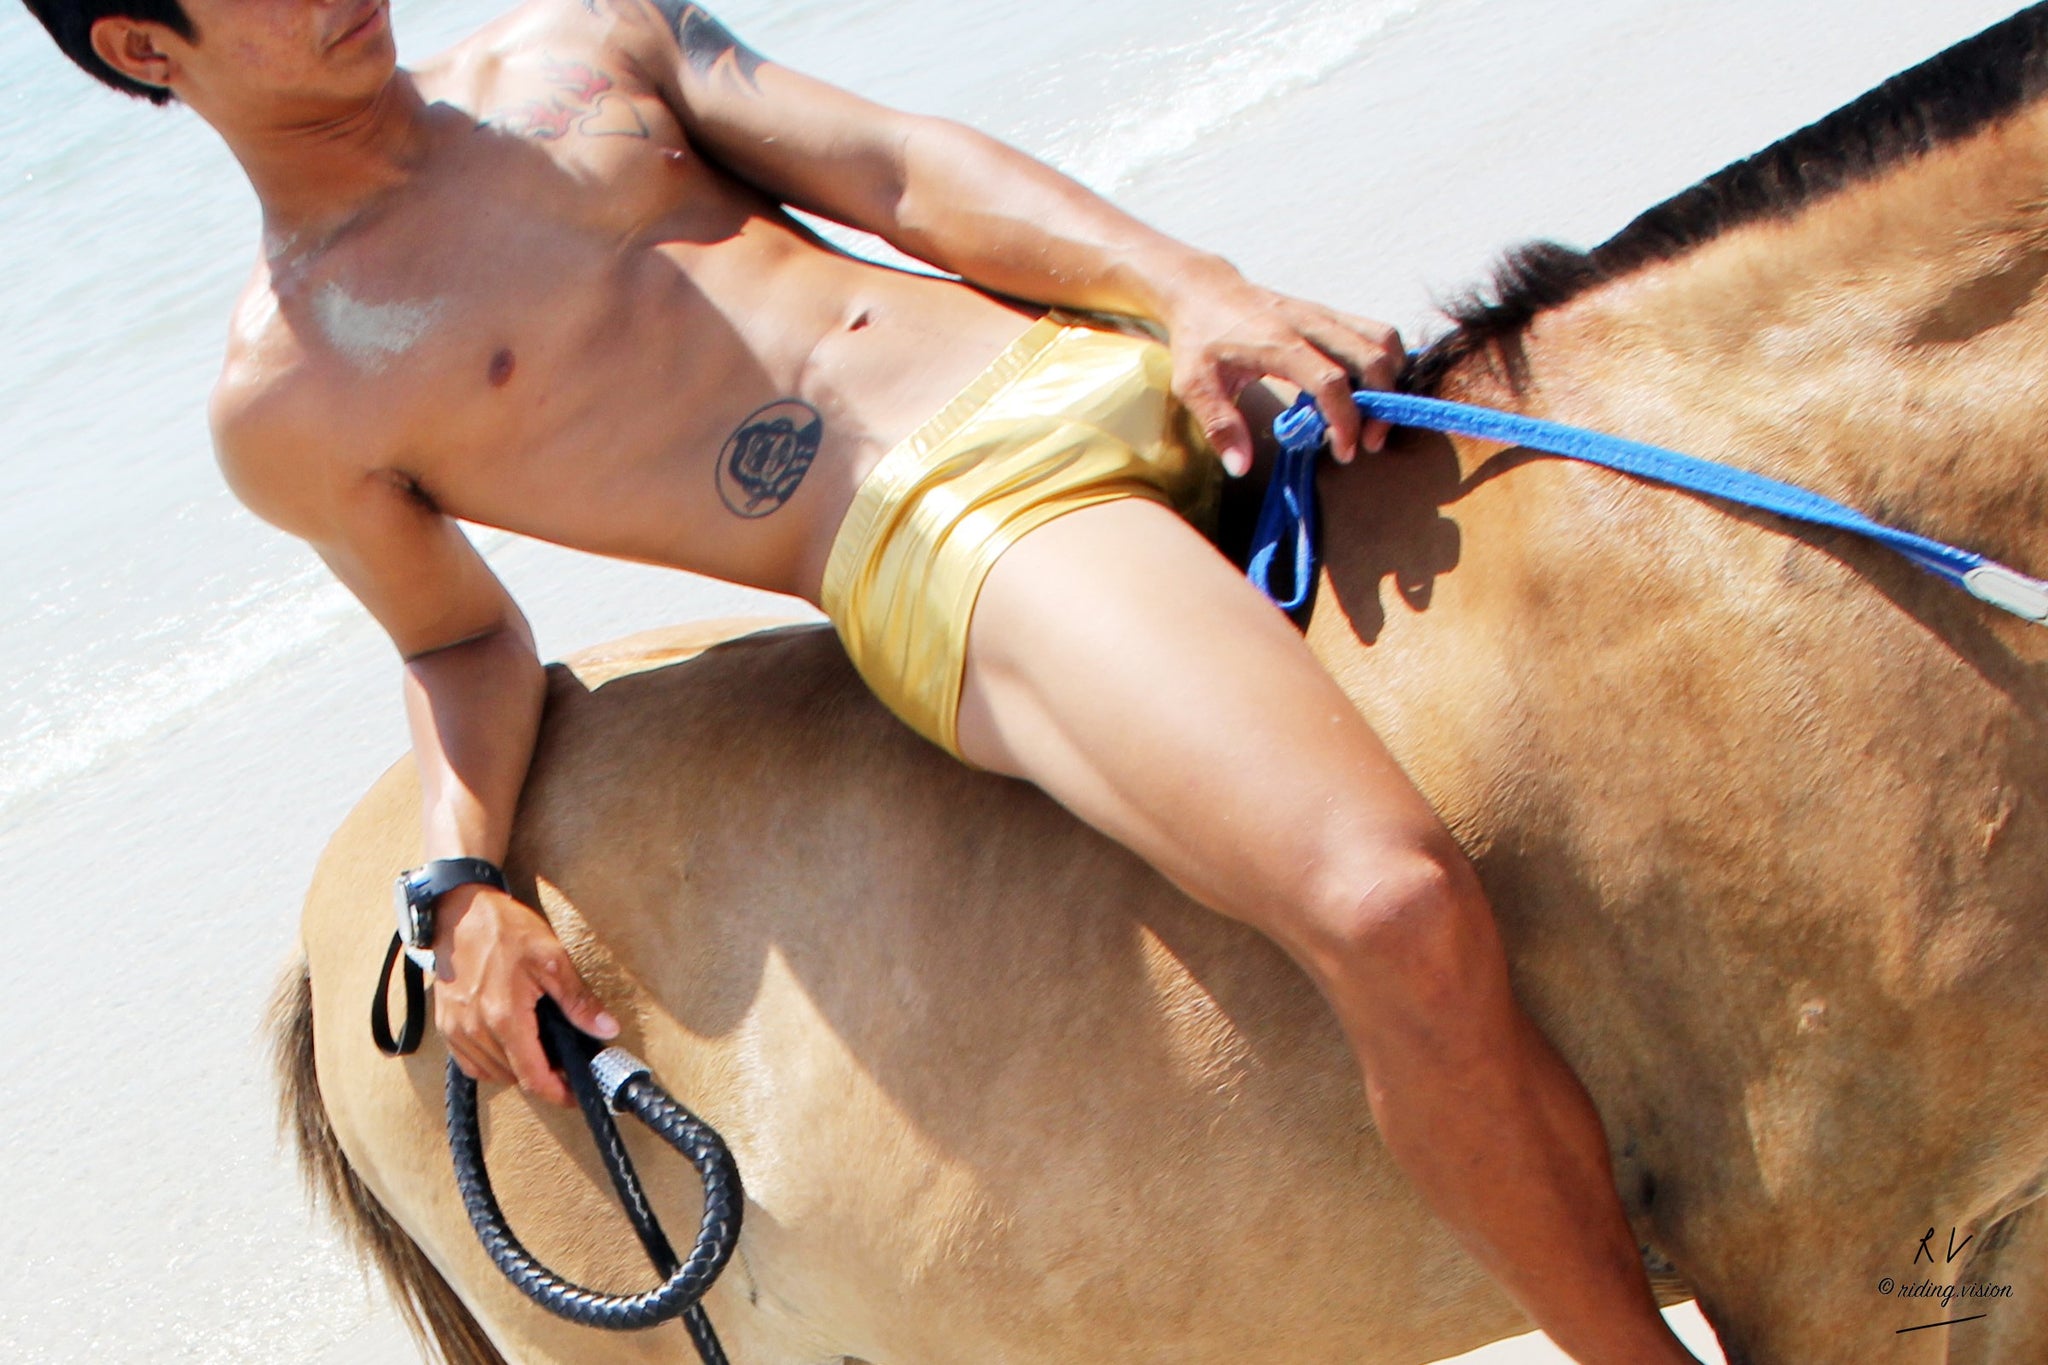 Free Sample Gallery: David in Golden Speedos Riding Bareback on Golden Pony, Part 2 - Riding.Vision